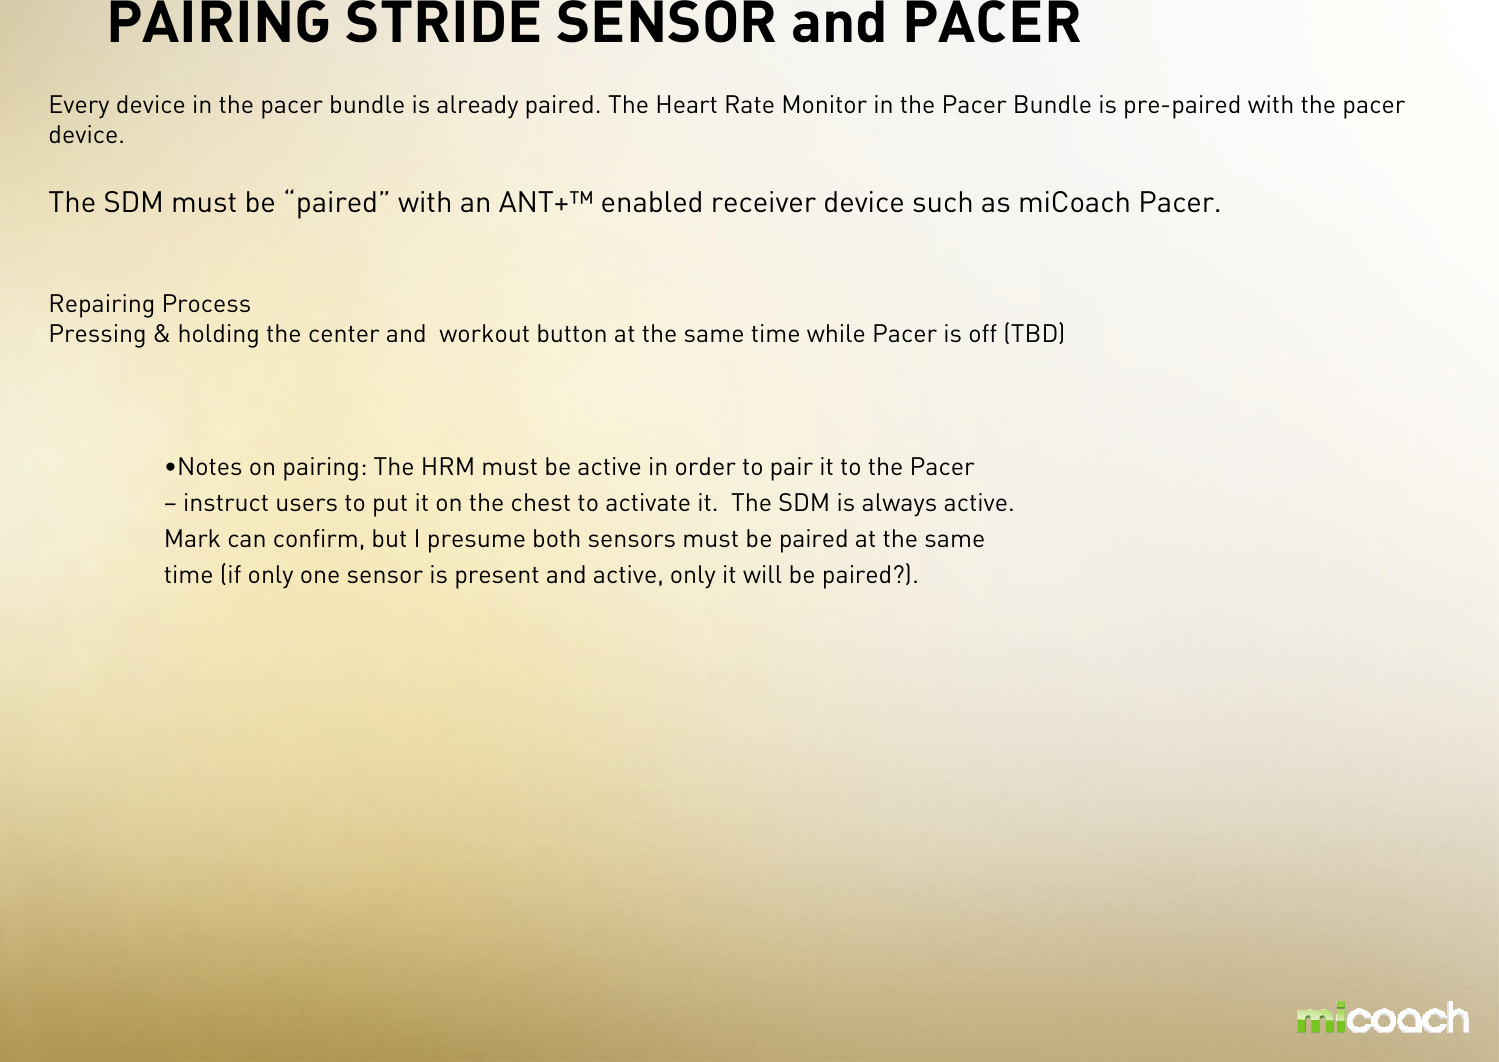 PAIRING STRIDE SENSOR and PACER Every device in the pacer bundle is already paired. The Heart Rate Monitor in the Pacer Bundle is pre-paired with the pacer device. The SDM must be “paired” with an ANT+™ enabled receiver device such as miCoach Pacer.Repairing ProcessPressing &amp; holding the center and  workout button at the same time while Pacer is off (TBD)•Notes on pairing: The HRM must be active in order to pair it to the Pacer – instruct users to put it on the chest to activate it. The SDM is always active. Mark can confirm, but I presume both sensors must be paired at the same time (if only one sensor is present and active, only it will be paired?). 